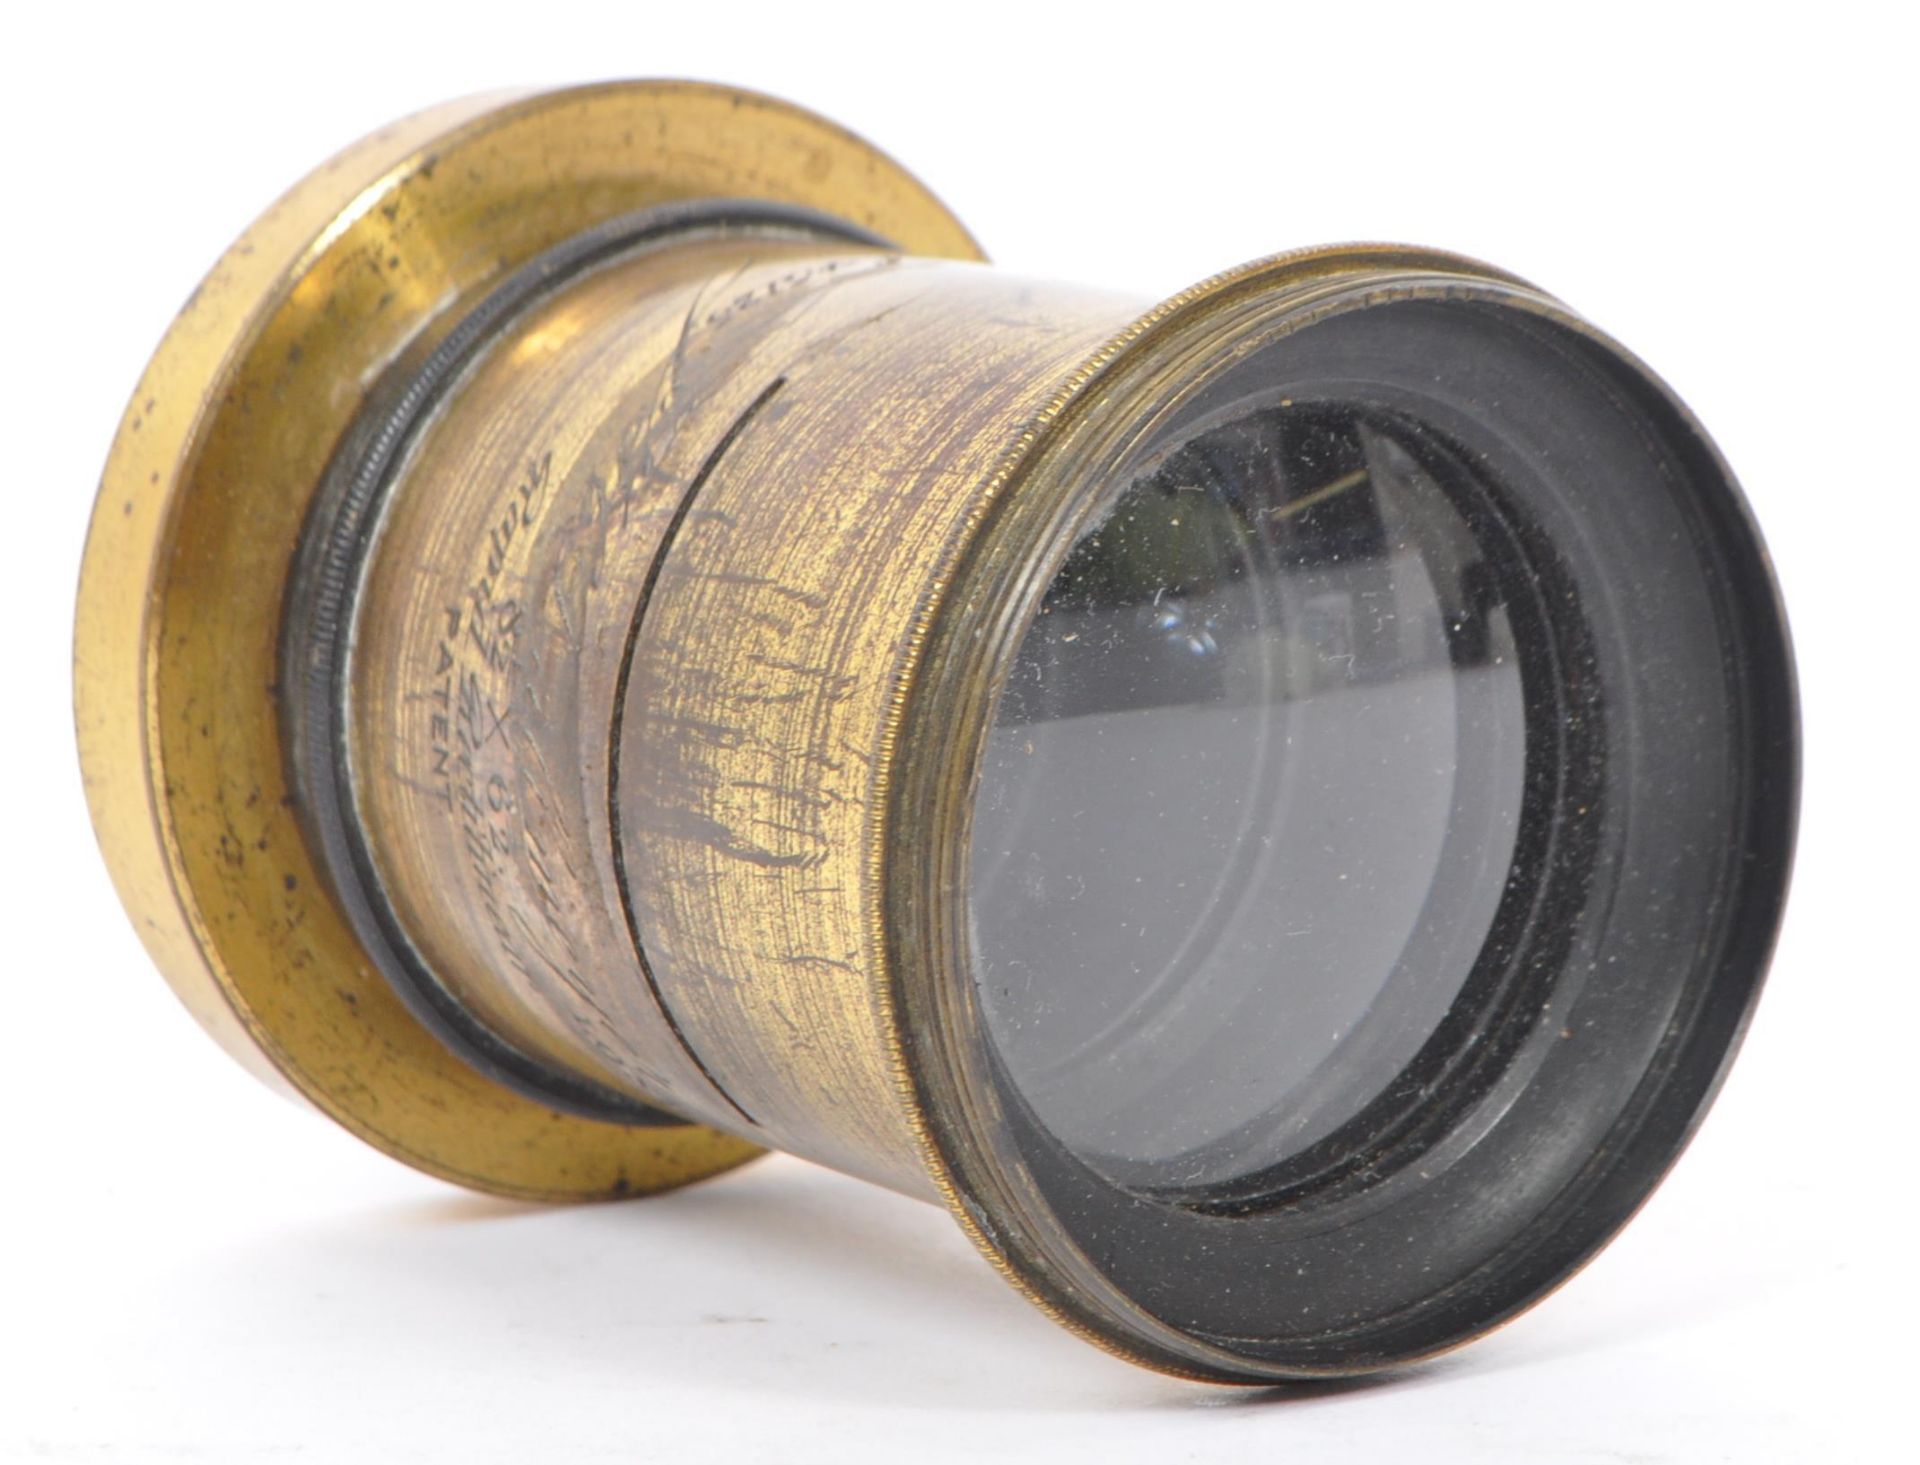 VICTORIAN DALLMEYER BRASS RAPID RECTILINEAR OBJECTIVE LENS - Image 2 of 5